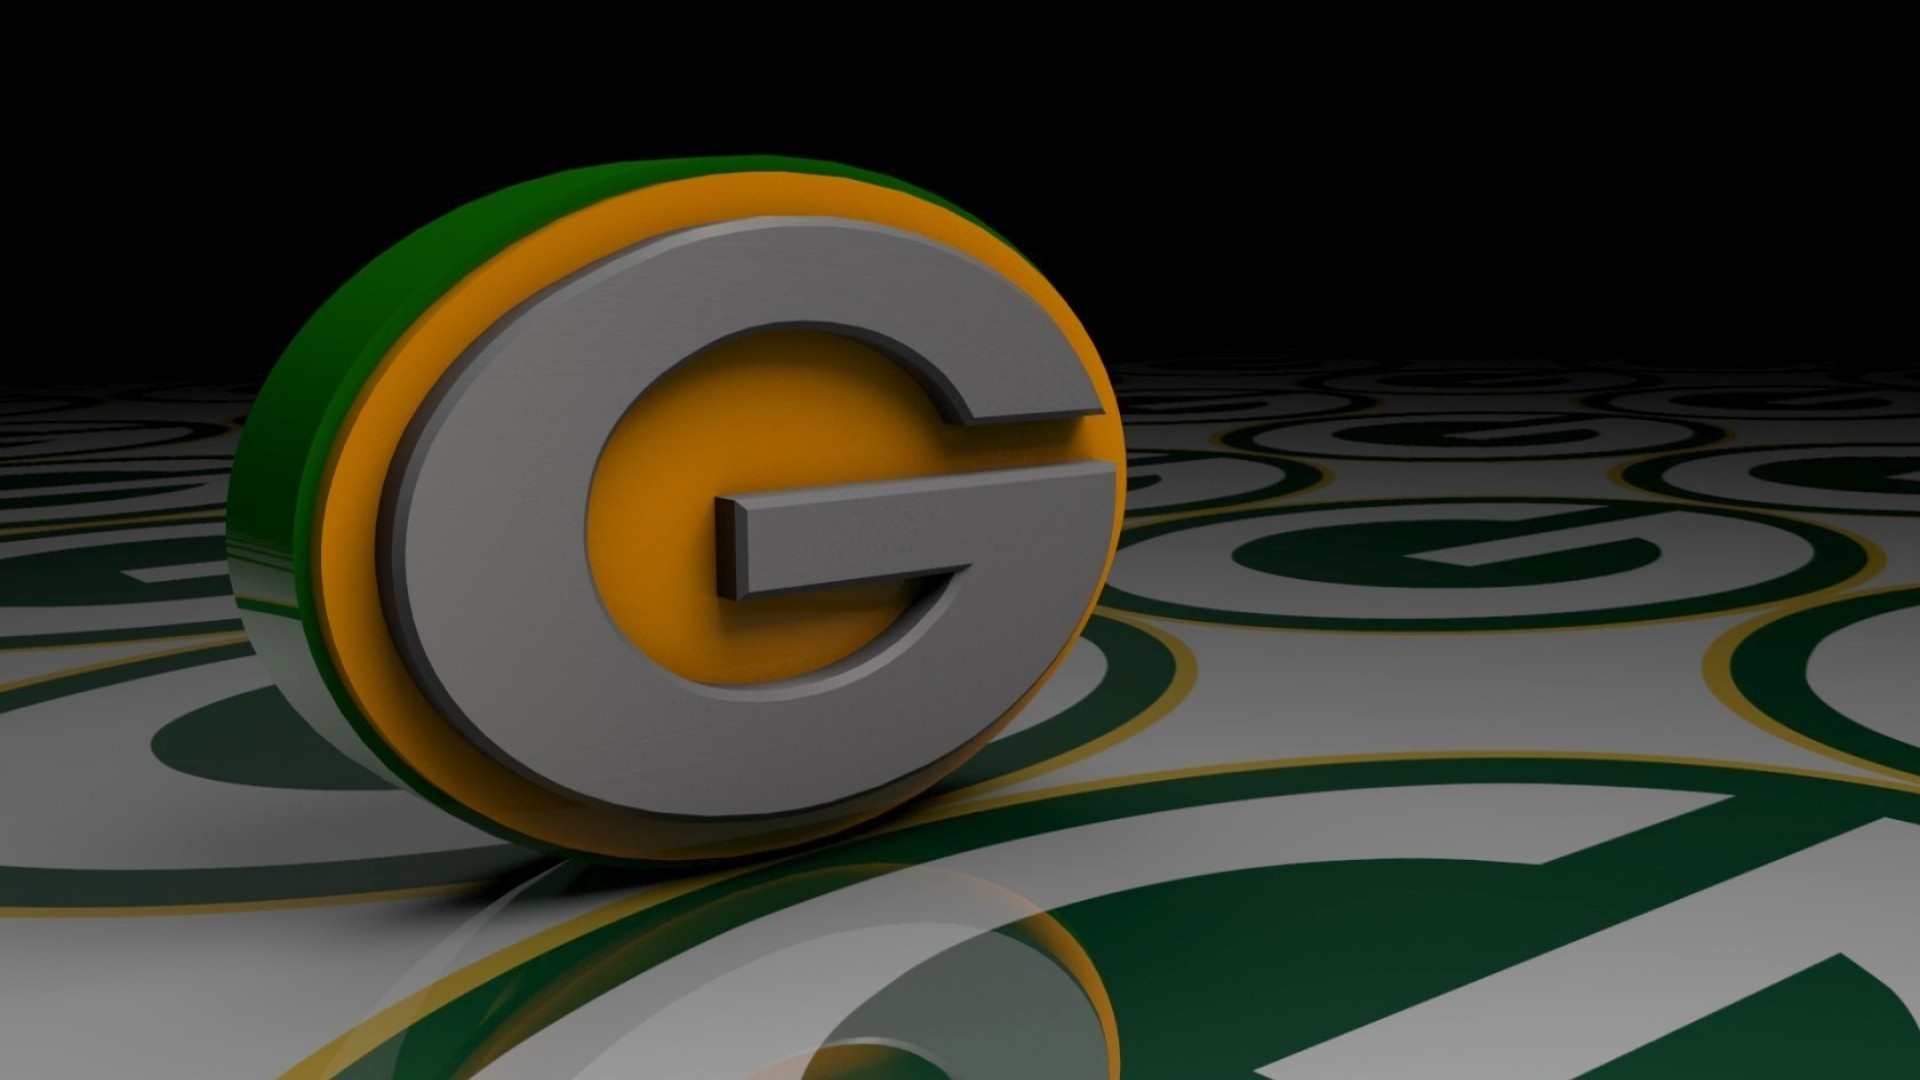 1920x1080 Green-Bay-Packers-Wallpaper-PIC-WPXH529835